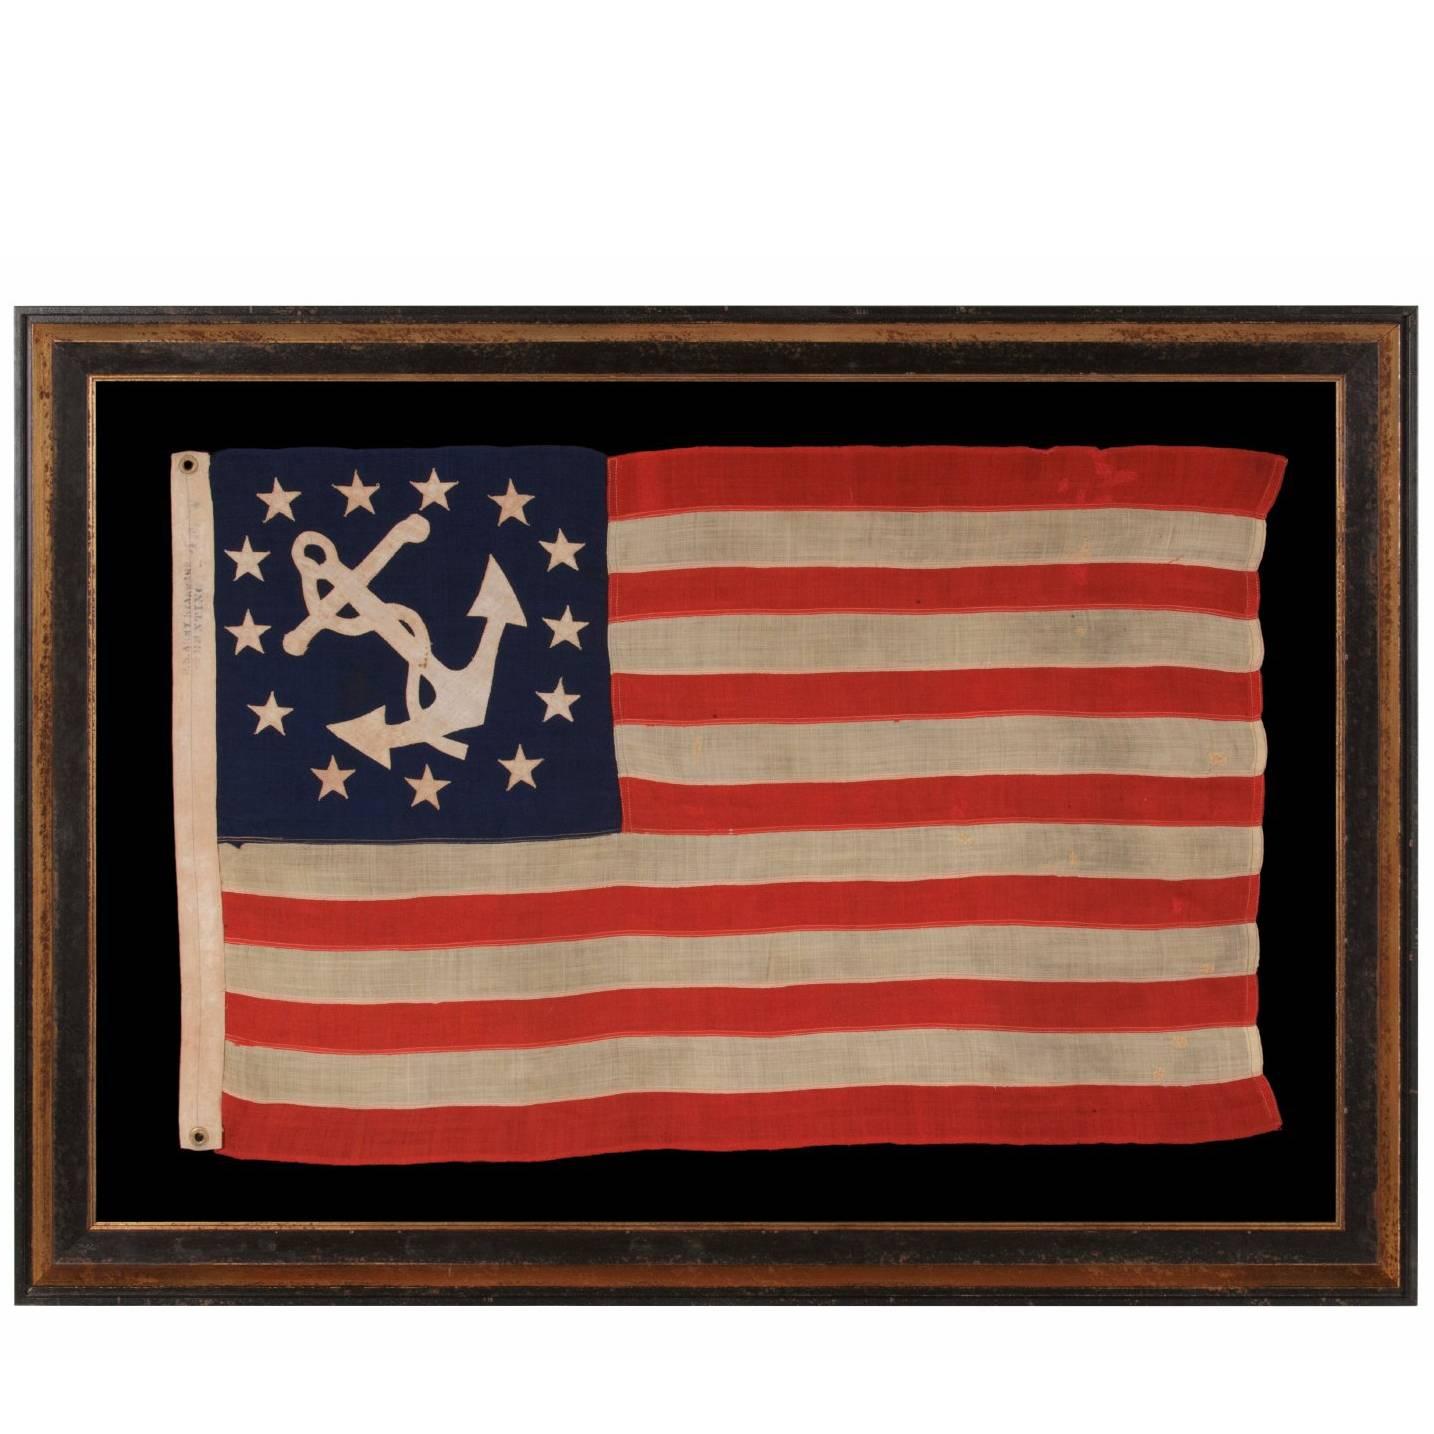 Antique American Private Yacht Flag with 13 Stars Marked "U.S Army.."